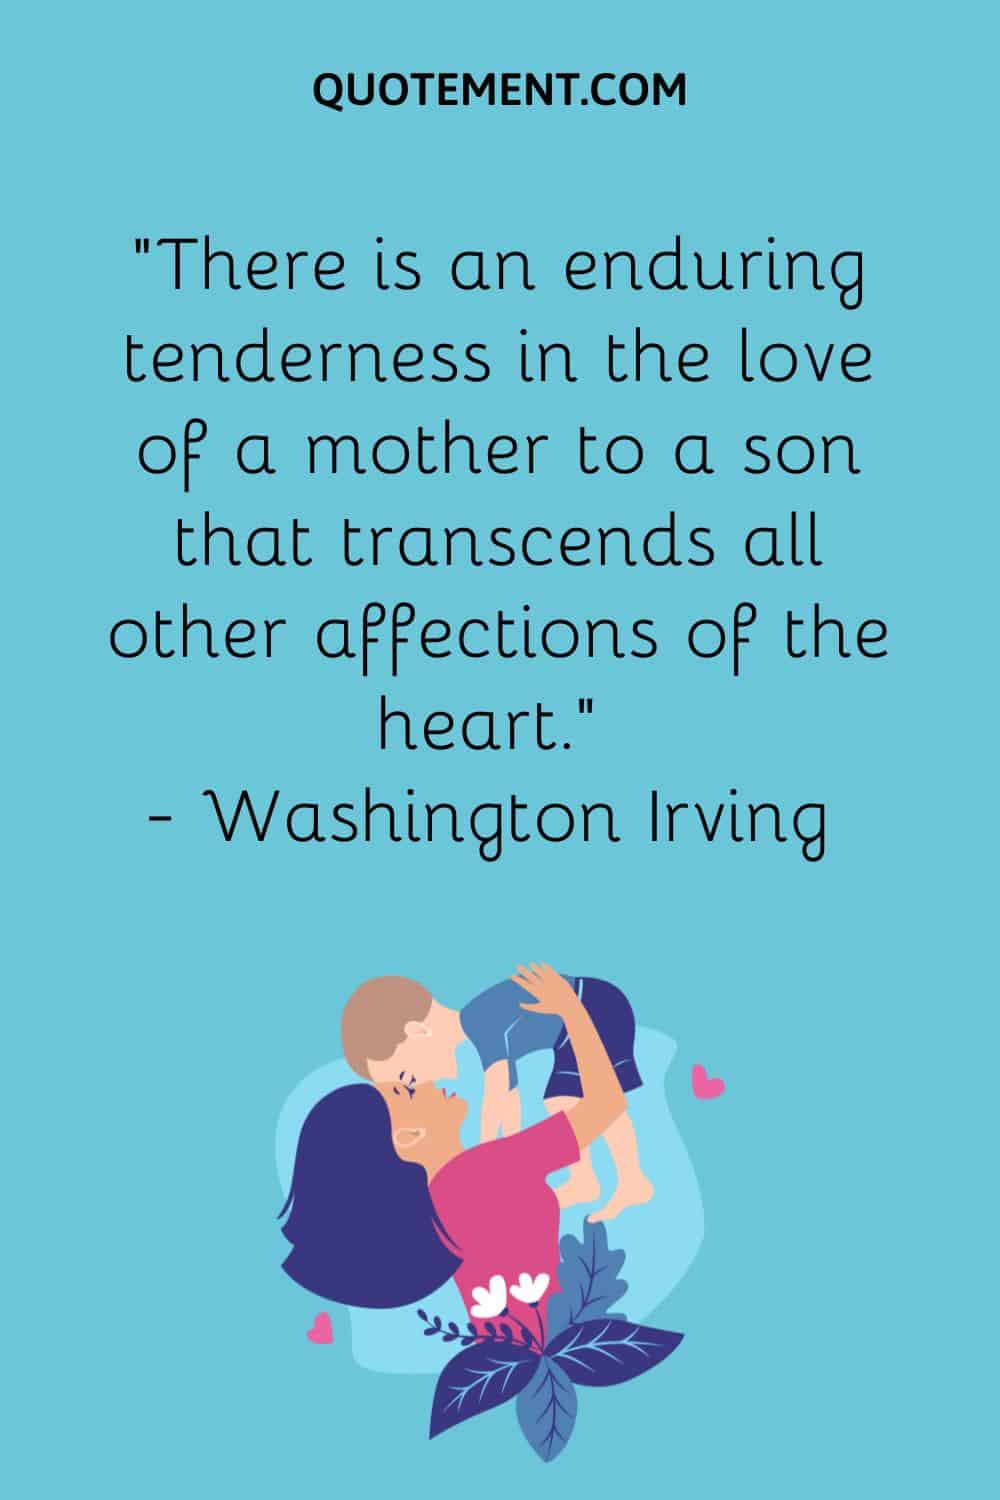 “There is an enduring tenderness in the love of a mother to a son that transcends all other affections of the heart.” — Washington Irving